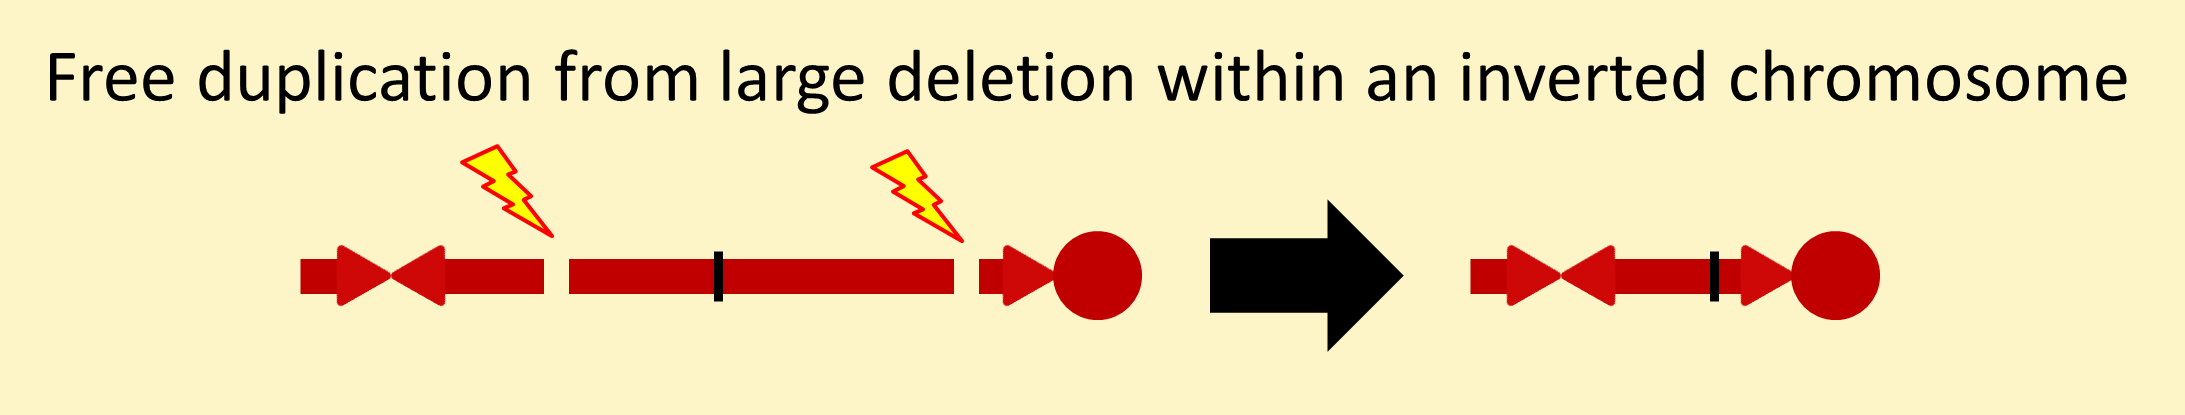 Free duplication from large deletion within an inverted chromosome